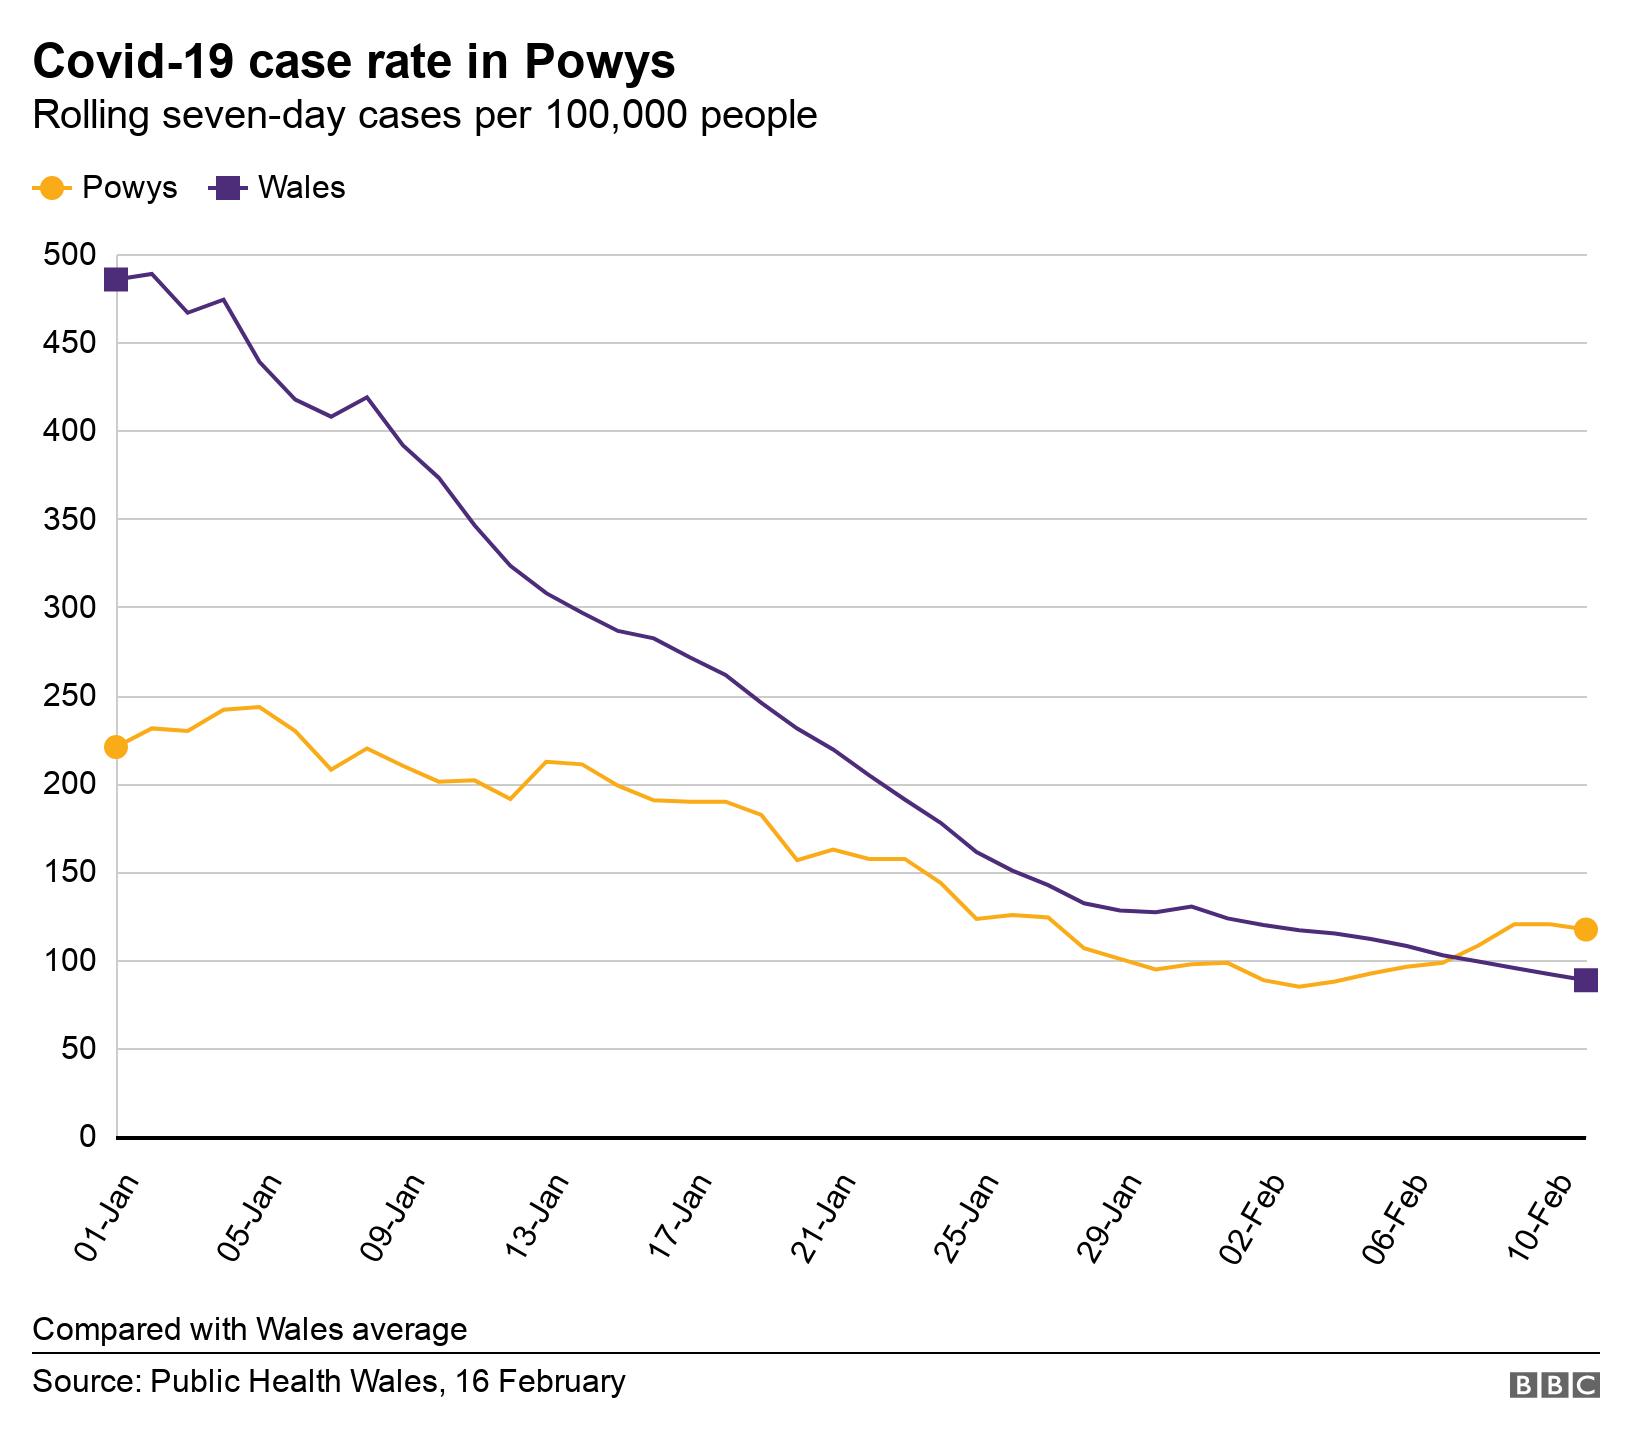 Covid-19 case rate in Powys. Rolling seven-day cases per 100,000 people.  Compared with Wales average.